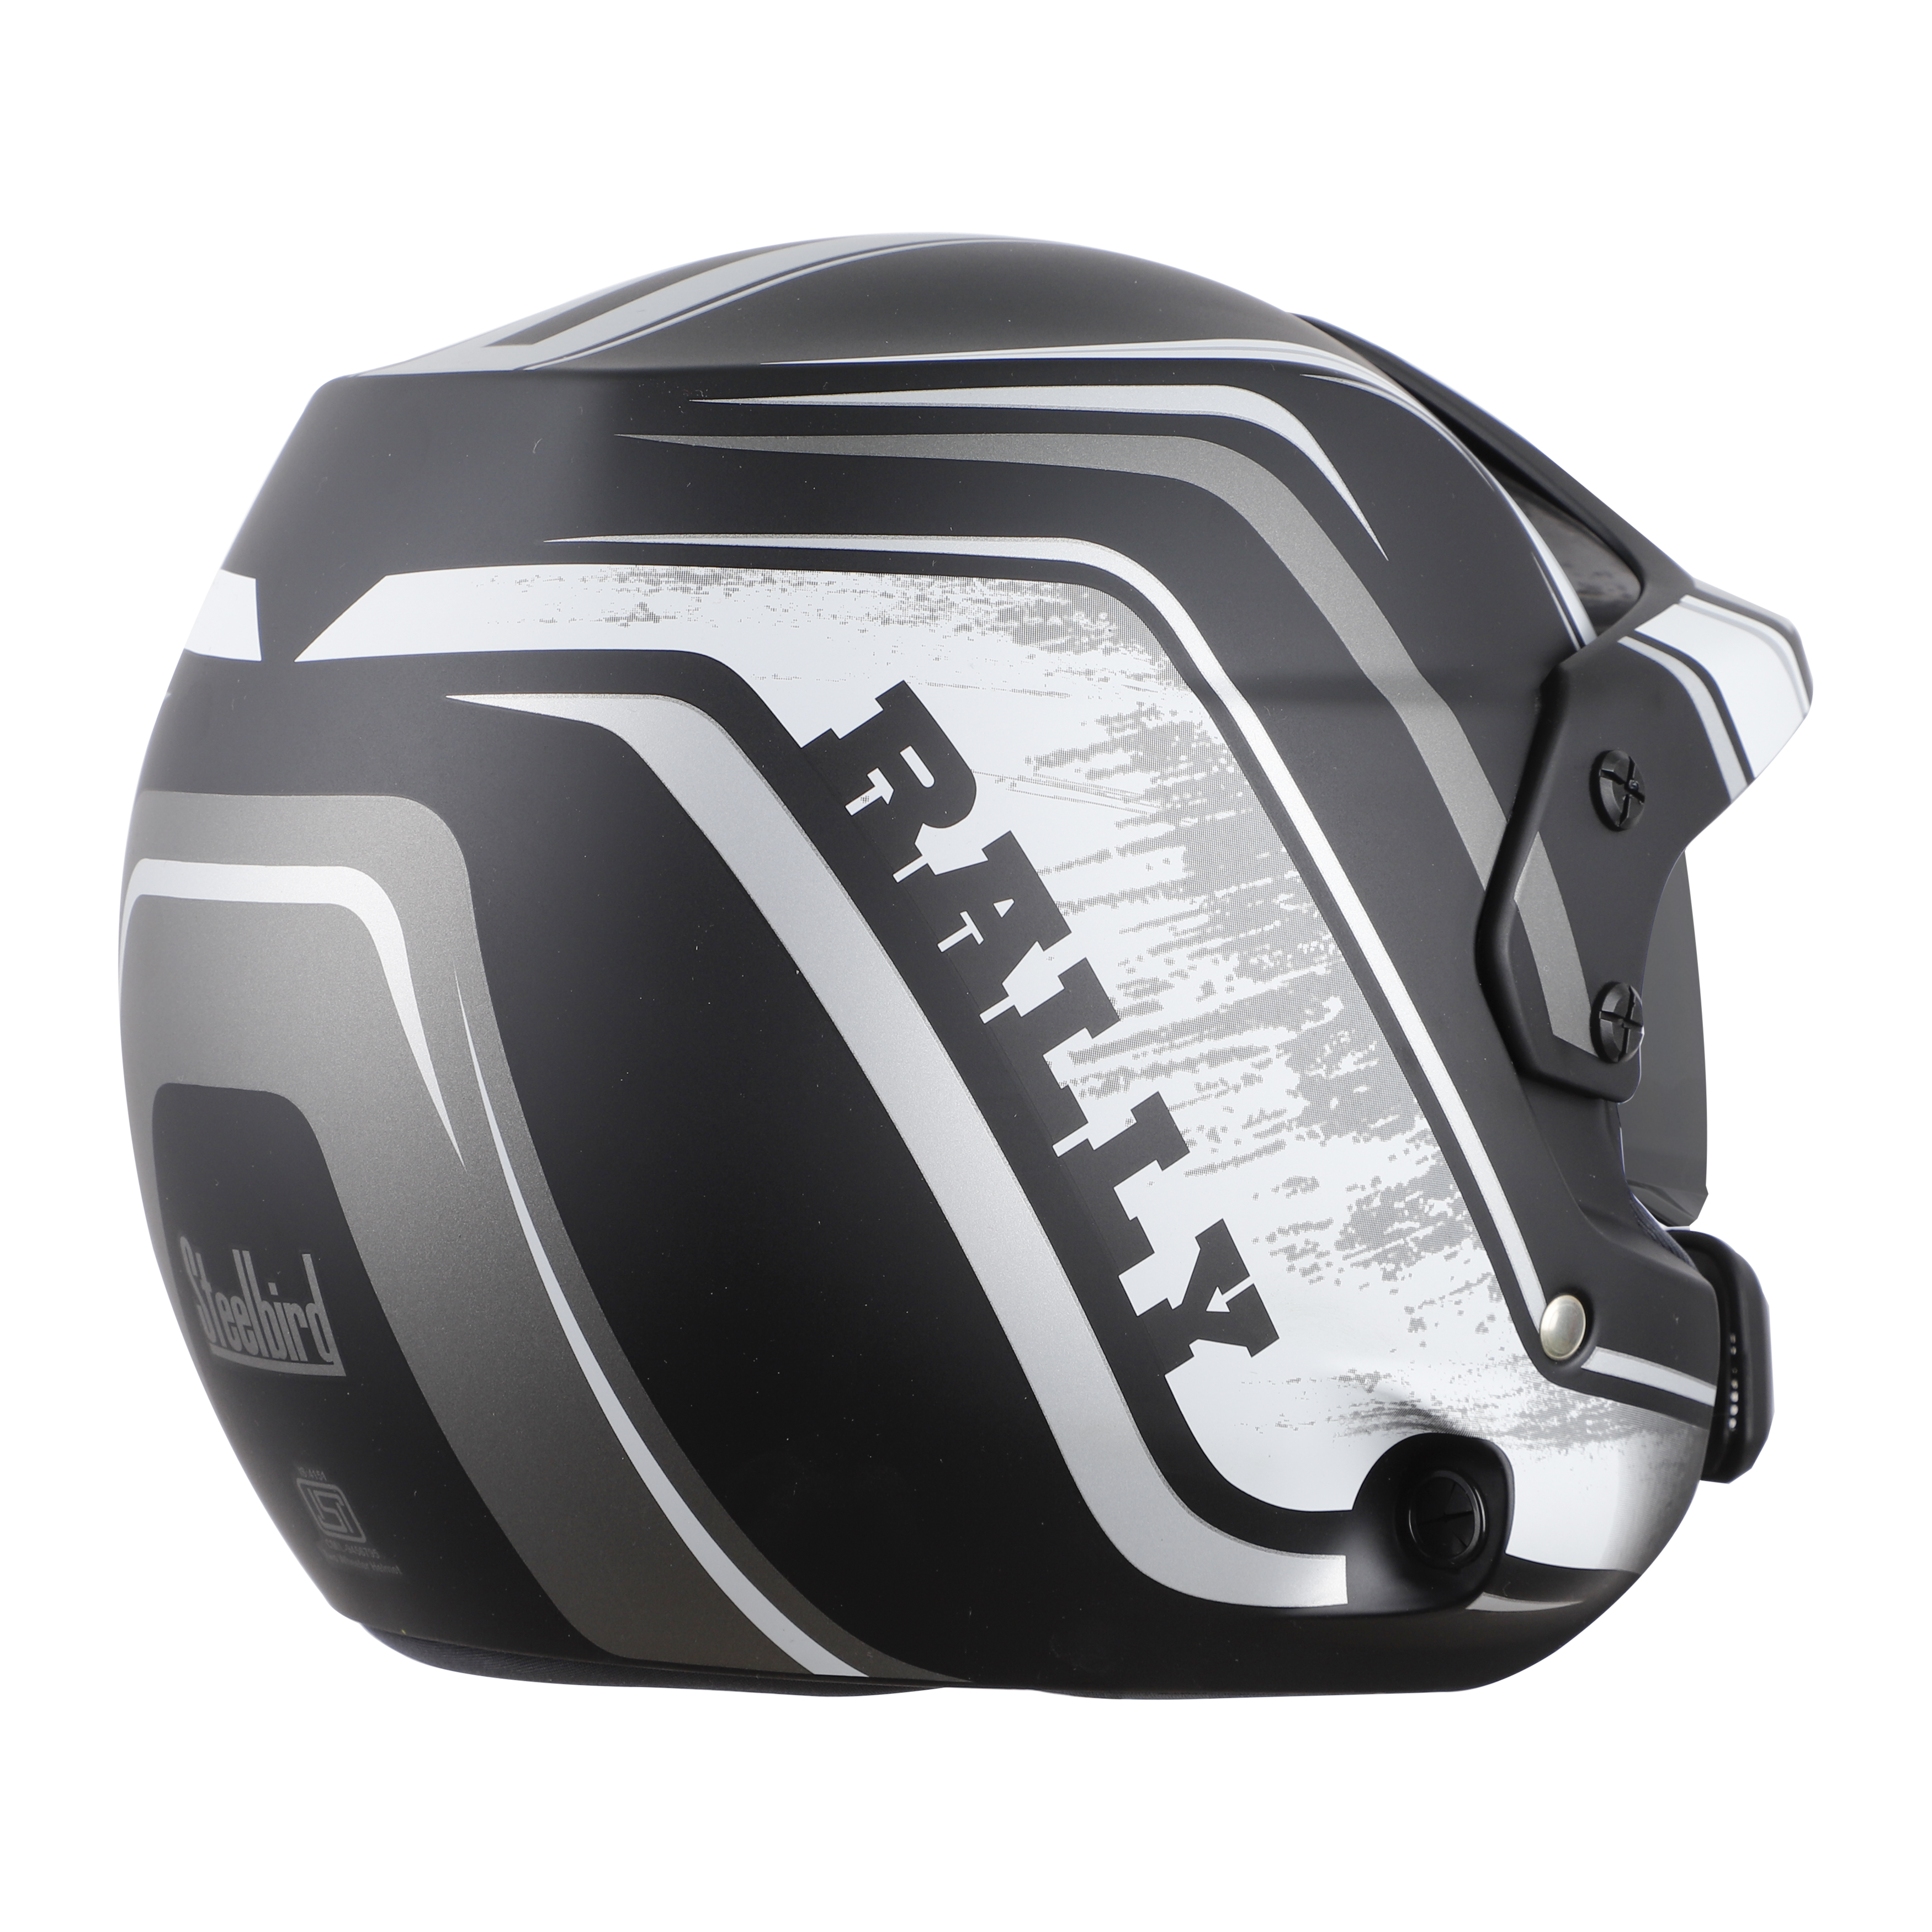 SB-51 RALLY RUT GLOSSY BLACK WITH GREY ( FITTED WITH CLEAR VISOR EXTRA SMOKE VISOR FREE)